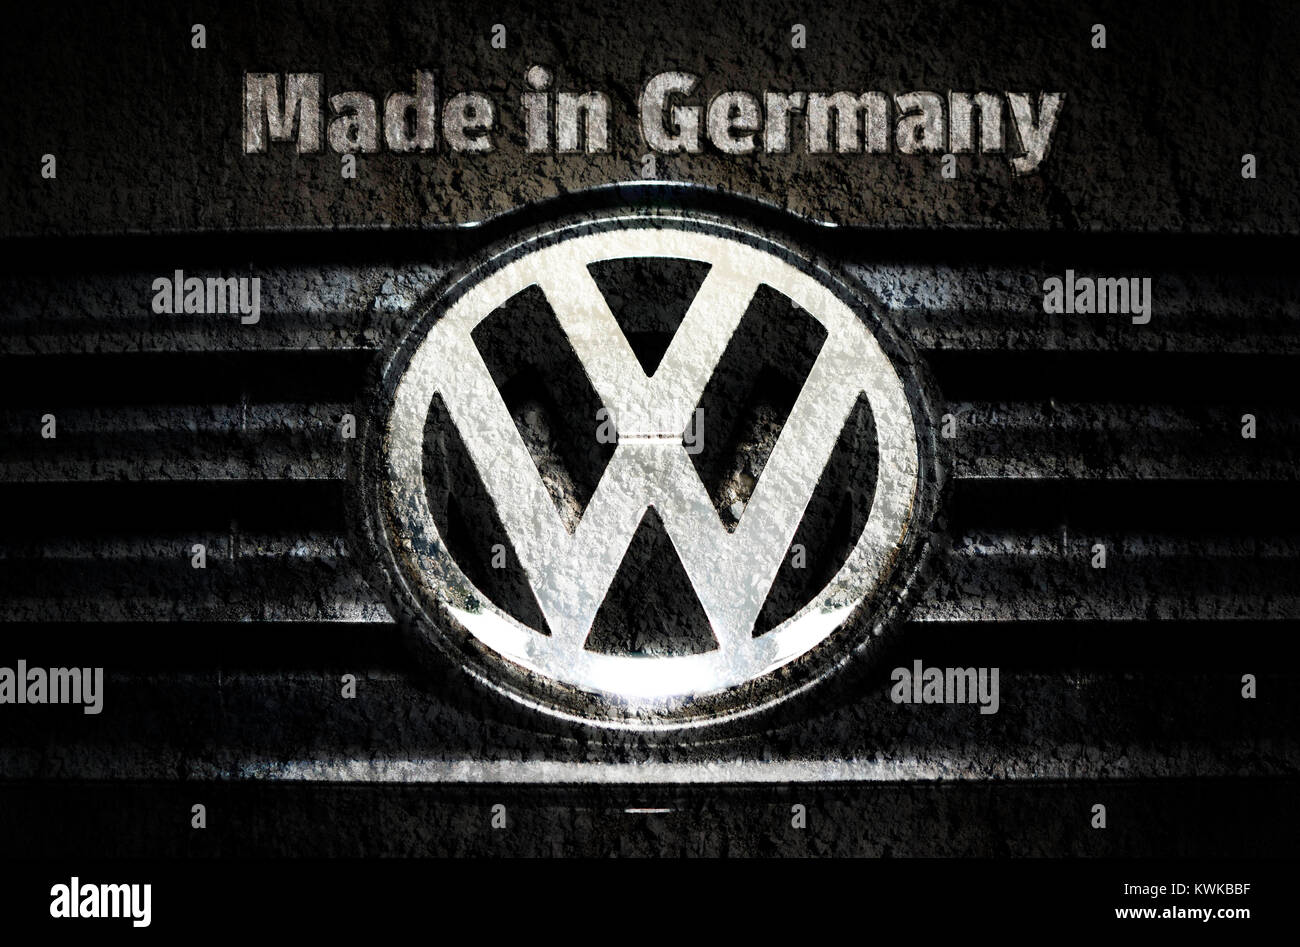 VW logo and stroke maggot in Germany, image damage by VW affair, VW-Logo und Schriftzug Made in Germany, Imageschaden durch VW-Aff?re Stock Photo